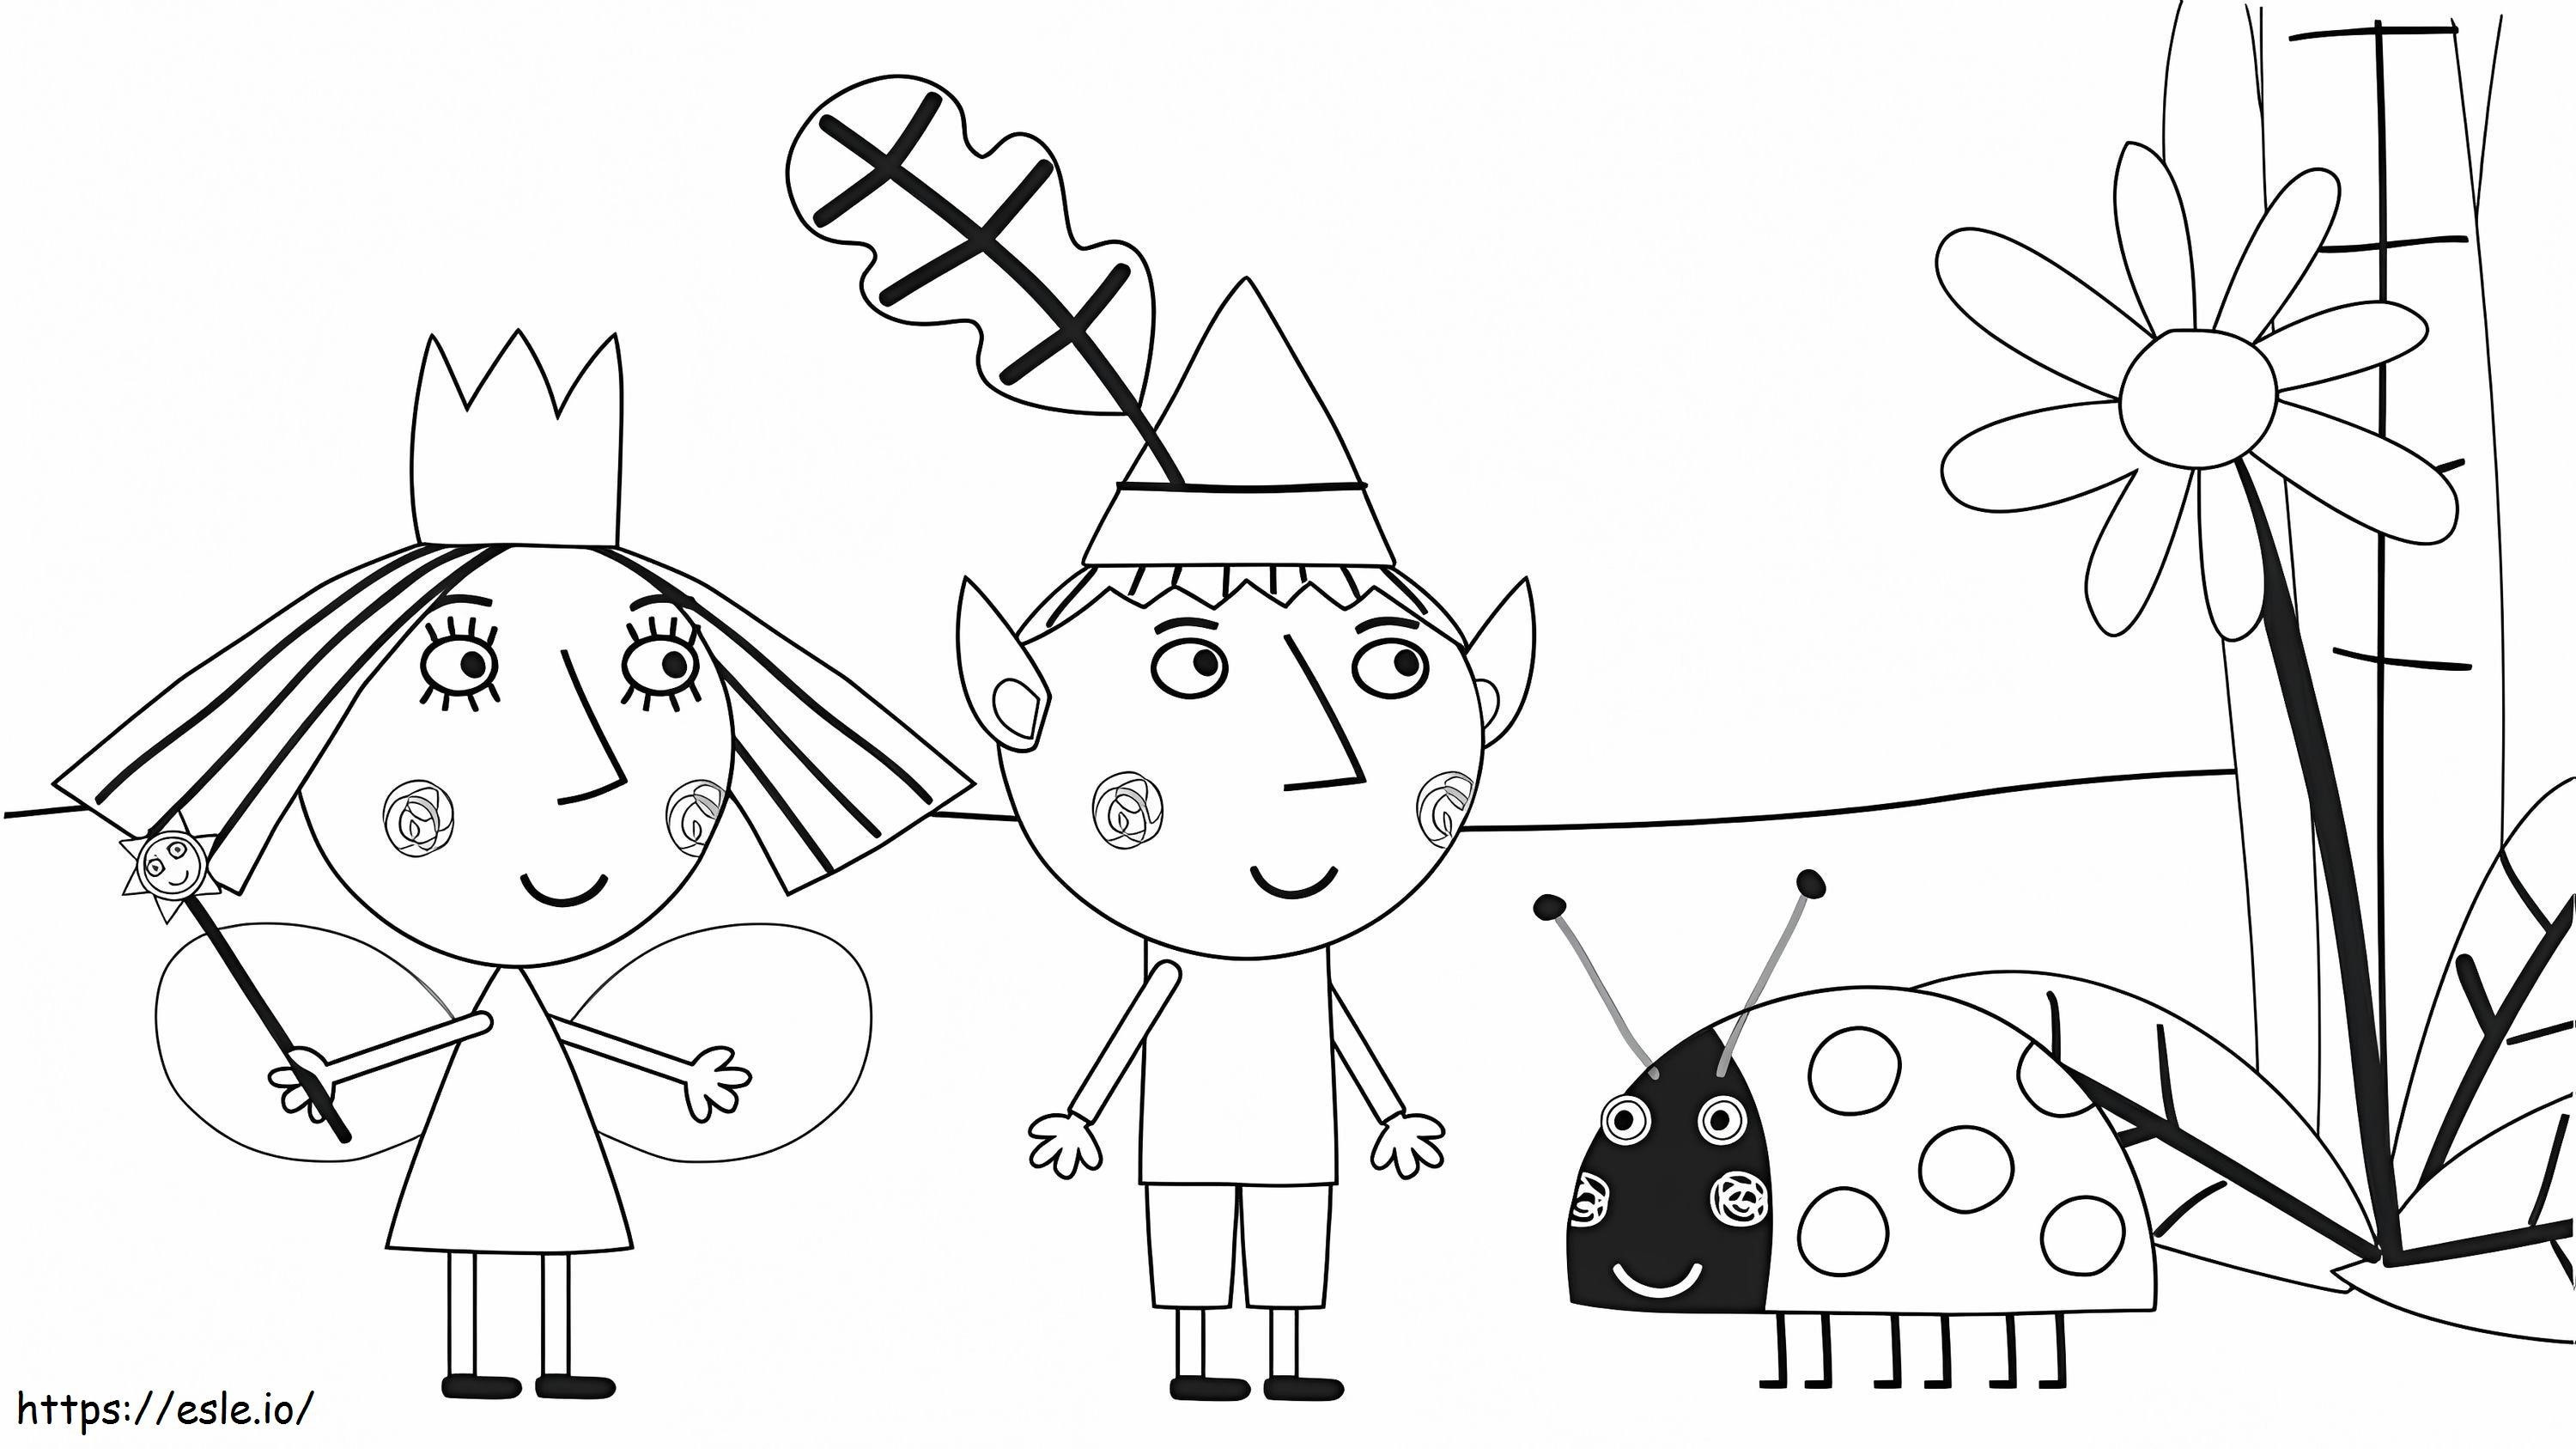 1559531110_Ben And Hollys Little Kingdom A4 coloring page